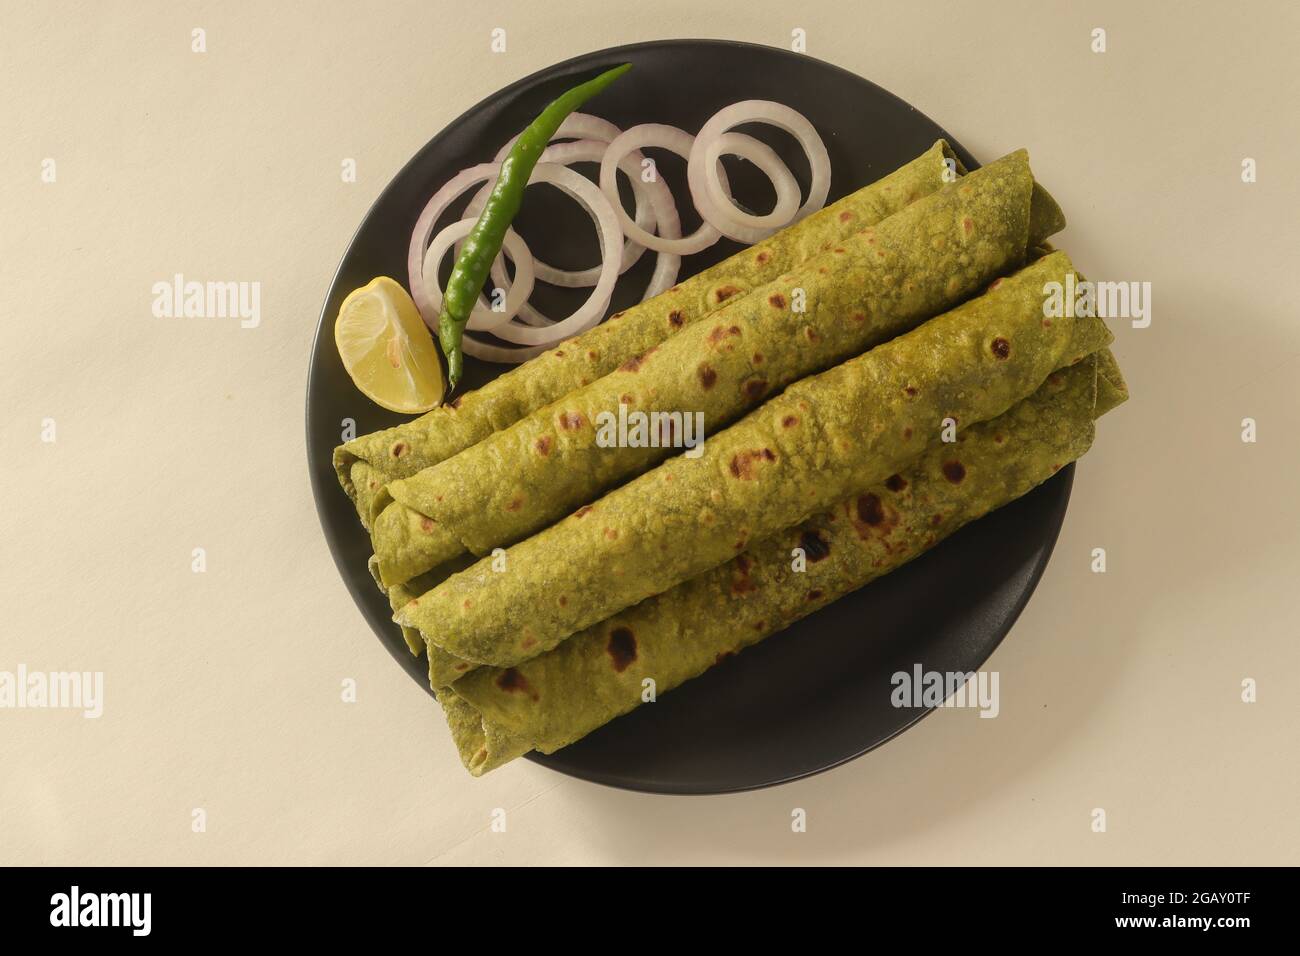 Indian flatbread made with whole wheat flour kneaded with pureed Indian spinach and spices. Popular in India as palak paratha. Stock Photo